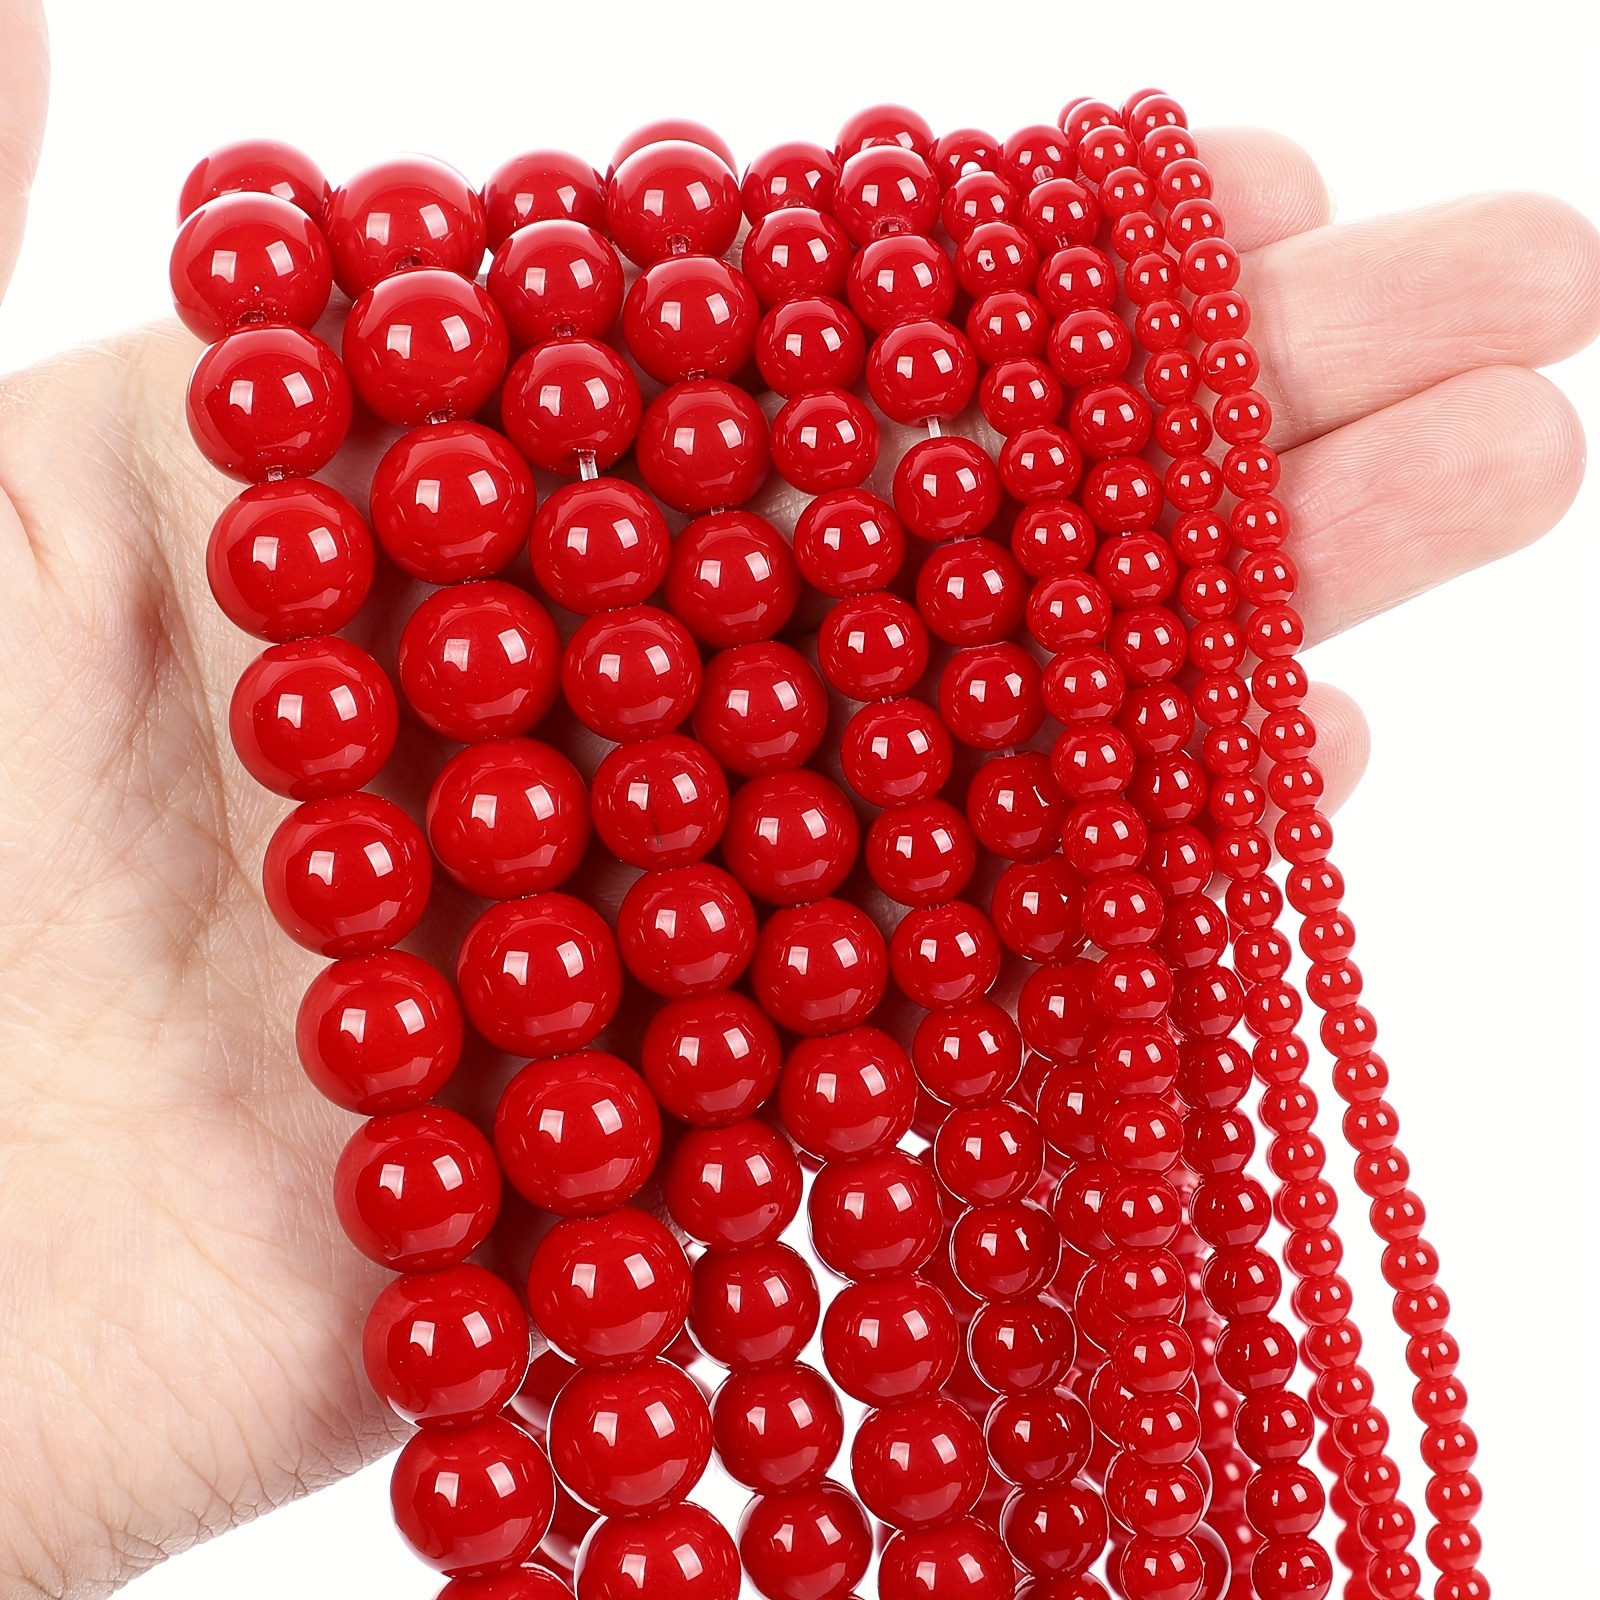 4-12mm Red Coral Glass Natural Stone Charm Round Loose Beads For Jewelry  Making DIY Unique Bracelets Necklace Handmade Craft Supplies